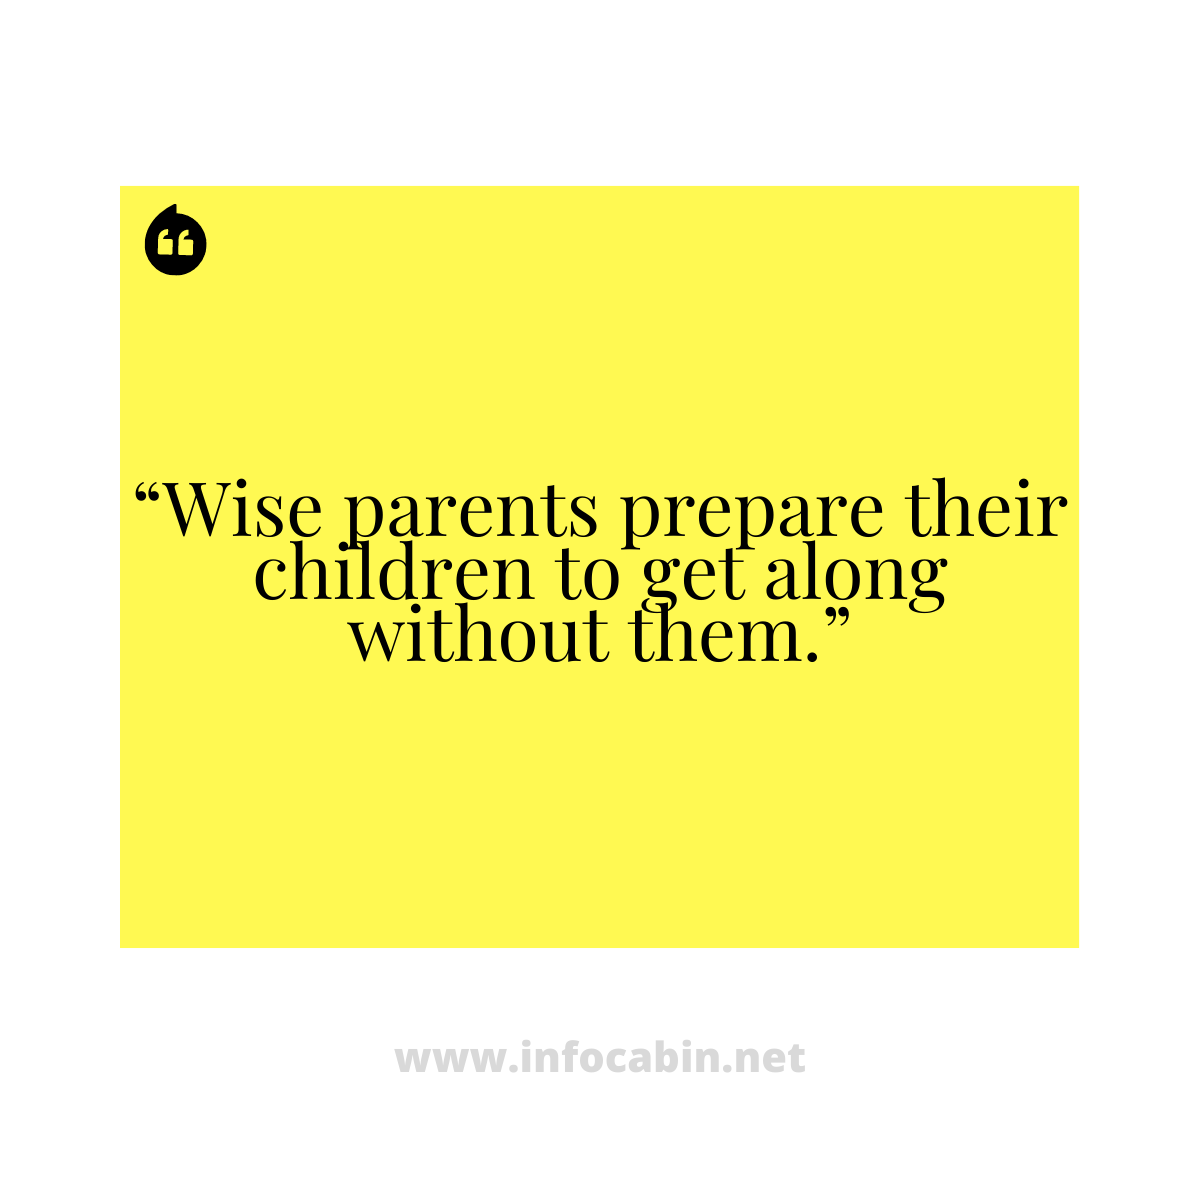 “Wise parents prepare their children to get along without them.”